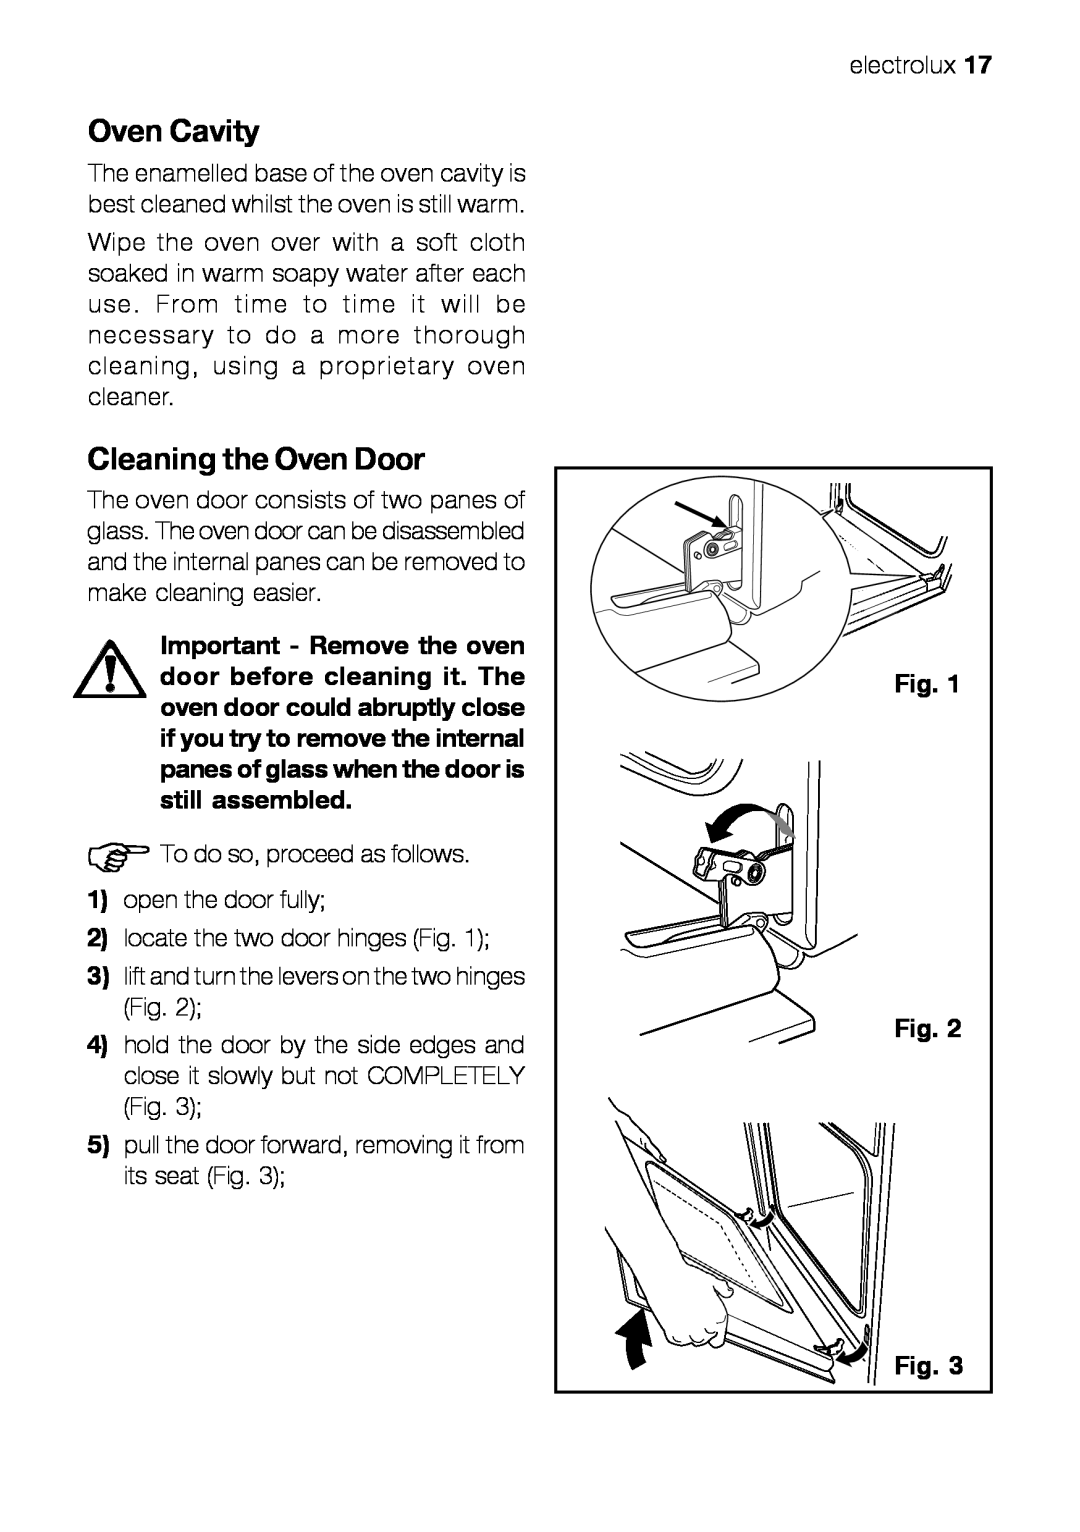 Electrolux EOB 21001 user manual Oven Cavity, Cleaning the Oven Door 